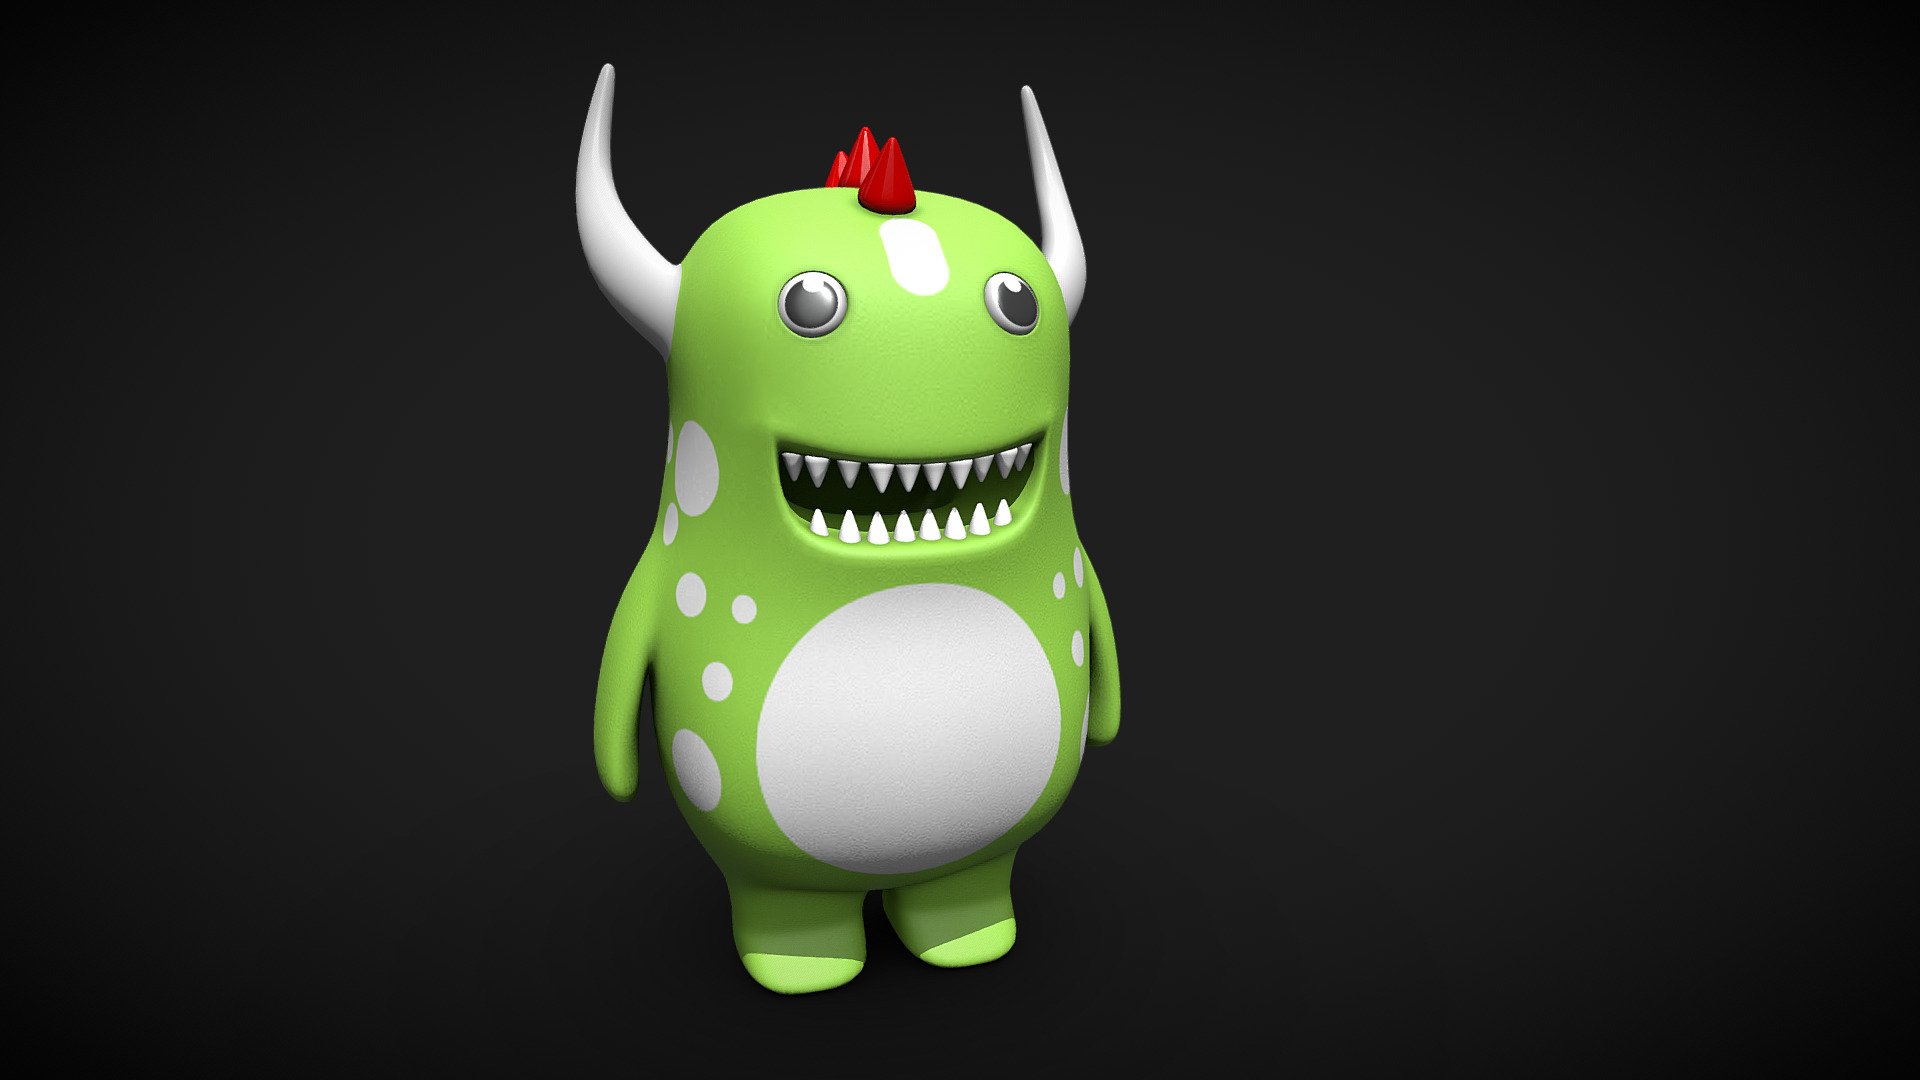 This high-quality 3D model represents a whimsical and friendly cartoon dragon character. The model accurately captures the playful essence of the character while showcasing intricate details and vibrant colors.

The cartoon dragon features a charming design with exaggerated features, including a cute face, expressive eyes, and a toothy grin. The model portrays the dragon's scaly texture, which adds to its fantastical appearance..

The model is optimized for visualization purposes, with clean geometry, proper materials, and vibrant texturing.

Whether you need it for storytelling, animations, or any other creative project, this 3D model of a cartoon dragon character will help you bring an enchanting and whimsical touch to your virtual environment.

Note: Please remember to respect intellectual property rights and ensure you have the necessary permissions to use and distribute any 3D models or designs based on copyrighted characters or concepts 3d model